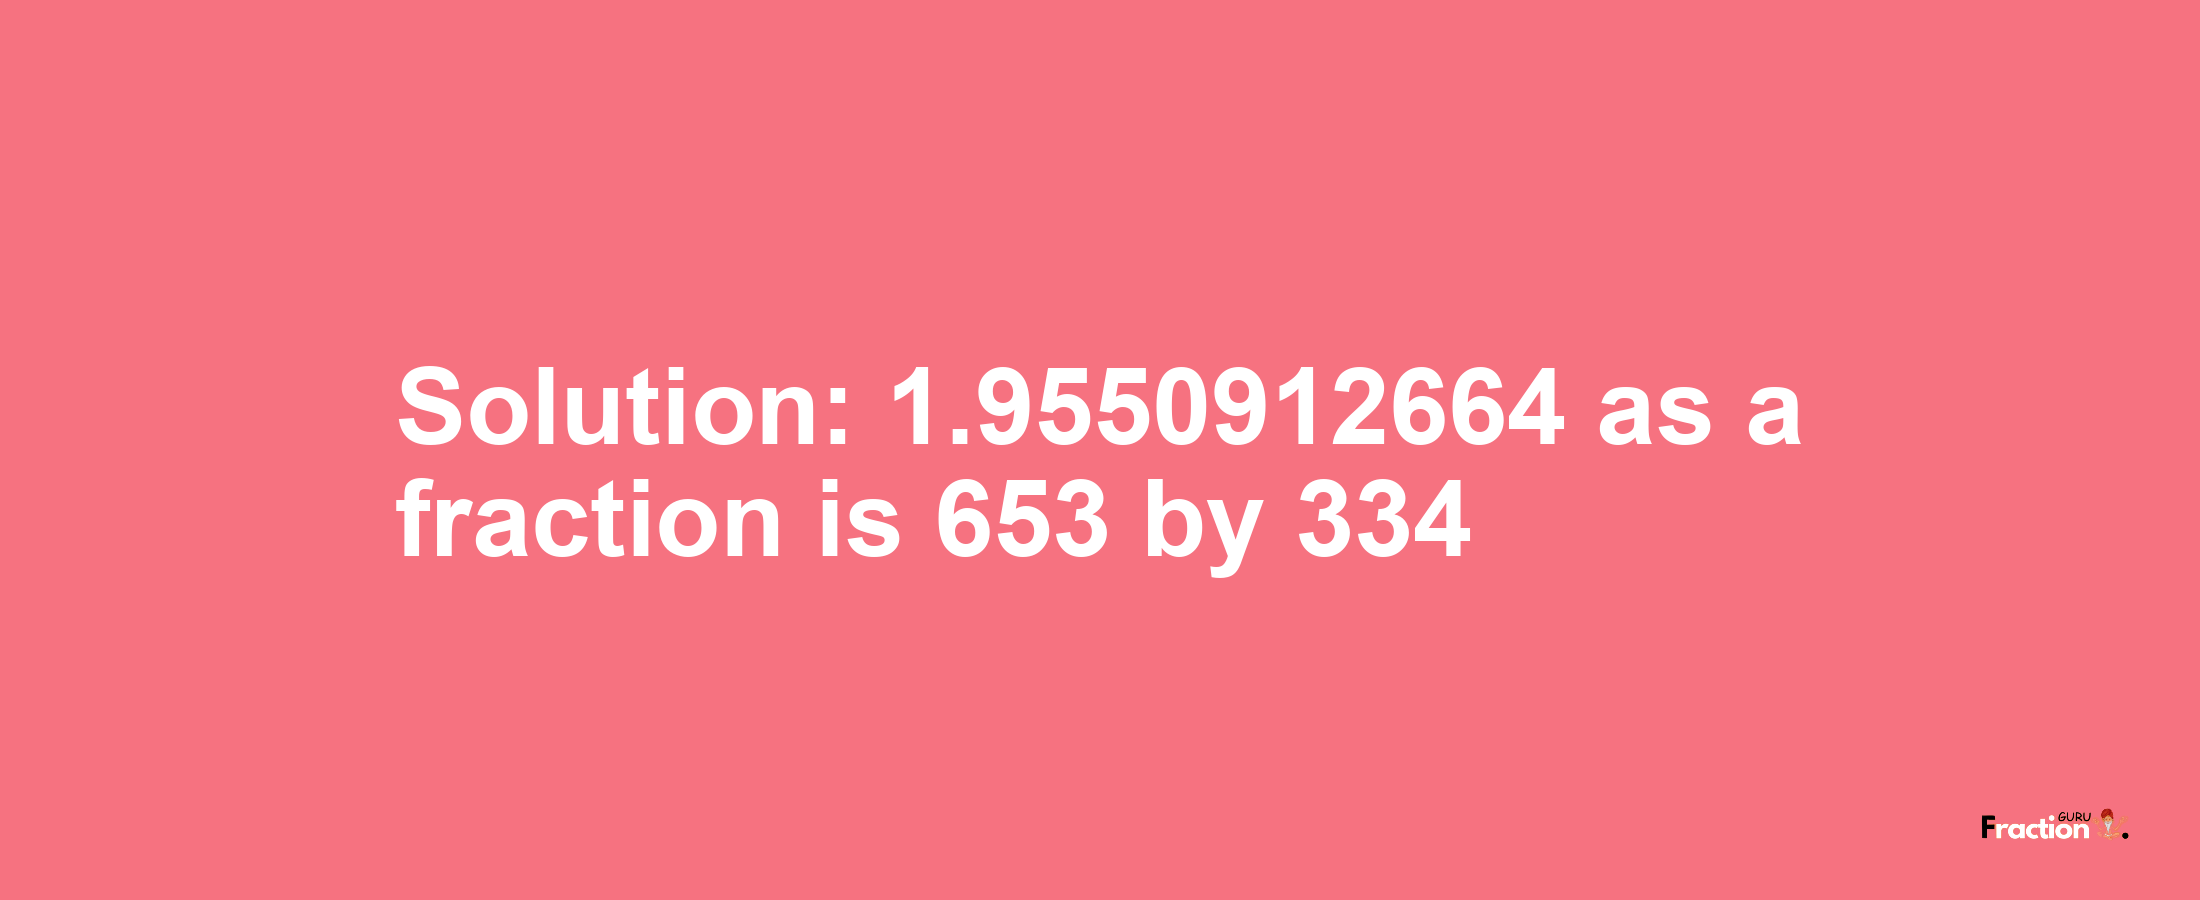 Solution:1.9550912664 as a fraction is 653/334